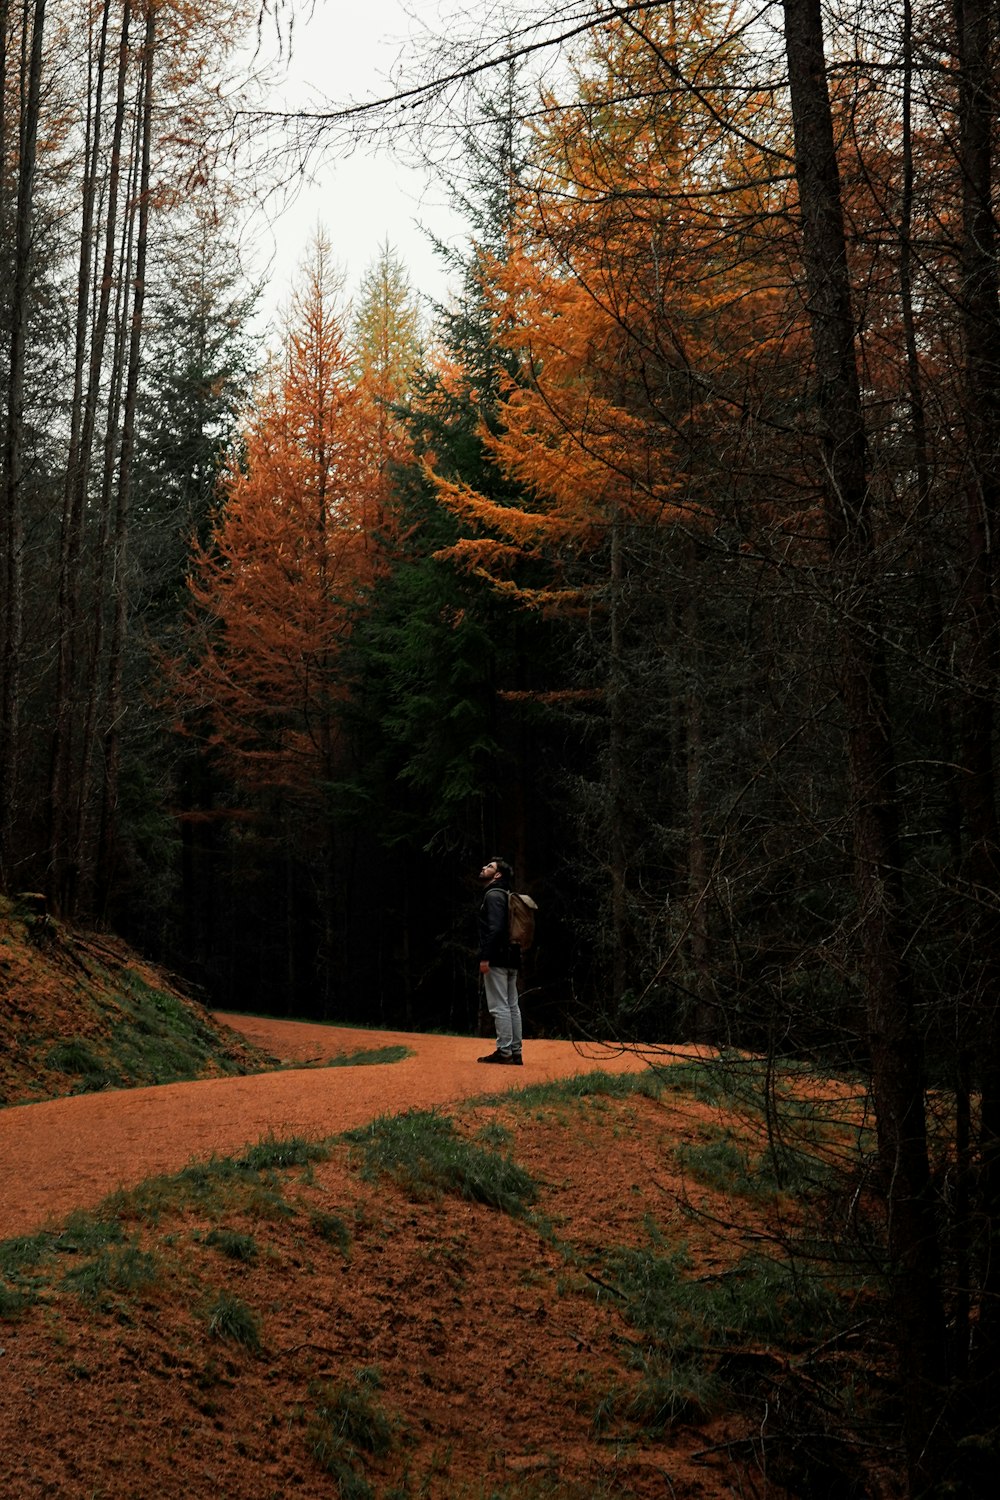 a person standing on a dirt road in the woods